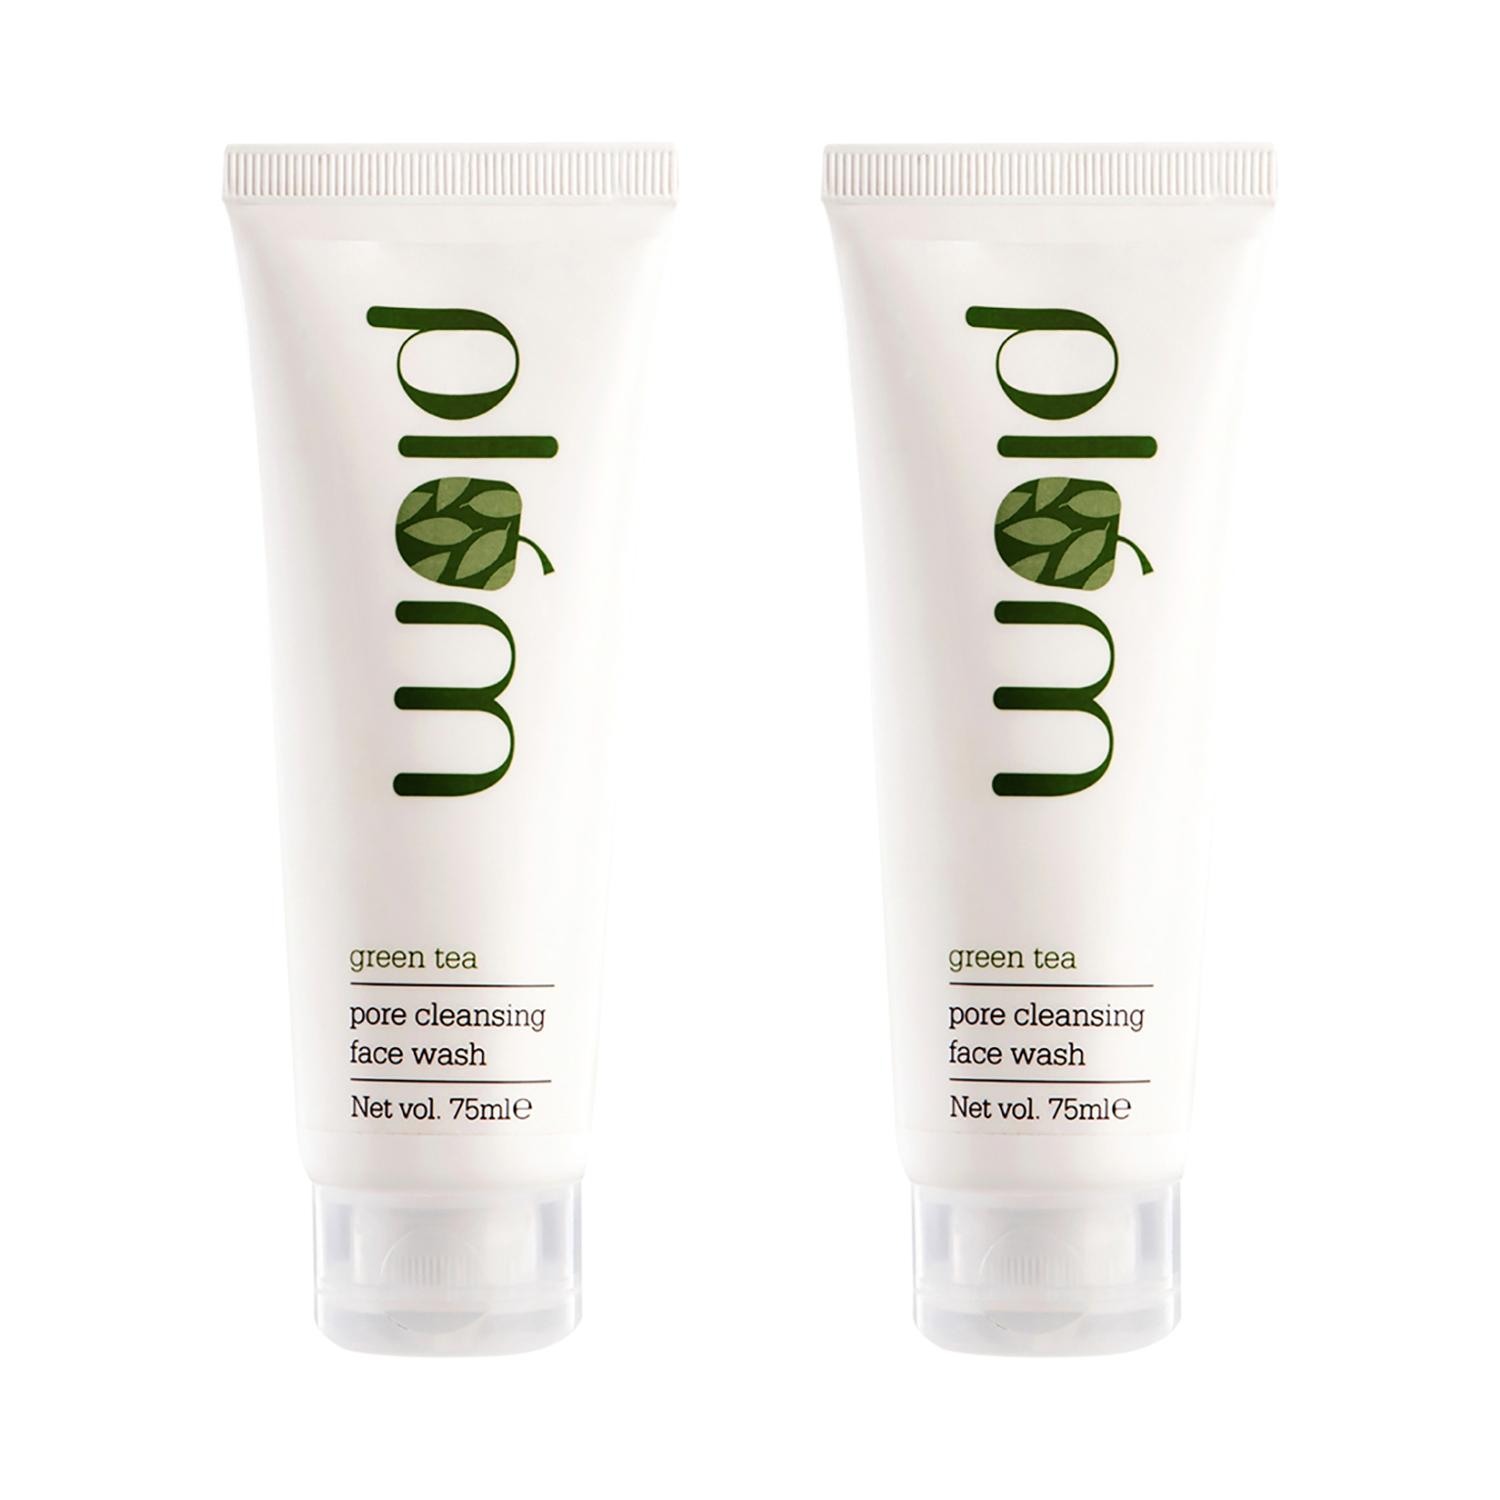 Plum | Plum Green Tea Pore Cleansing Face Wash, Oily Skin, Fights Acne (75ml) - Pack of 2 combo